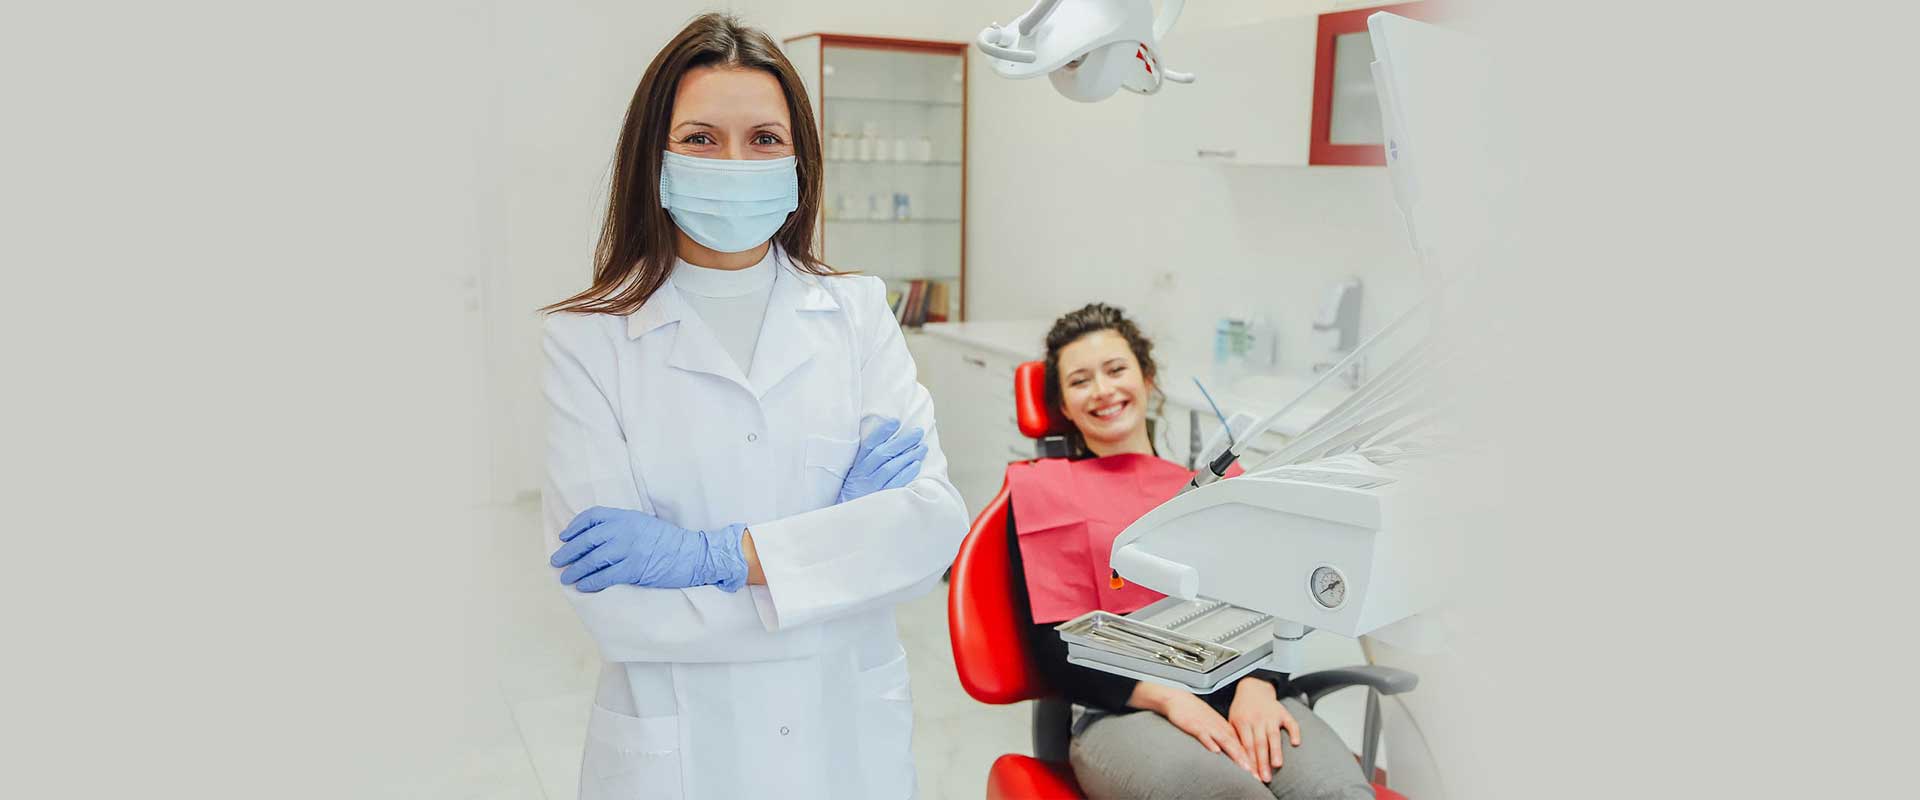 Your dental health is our priority